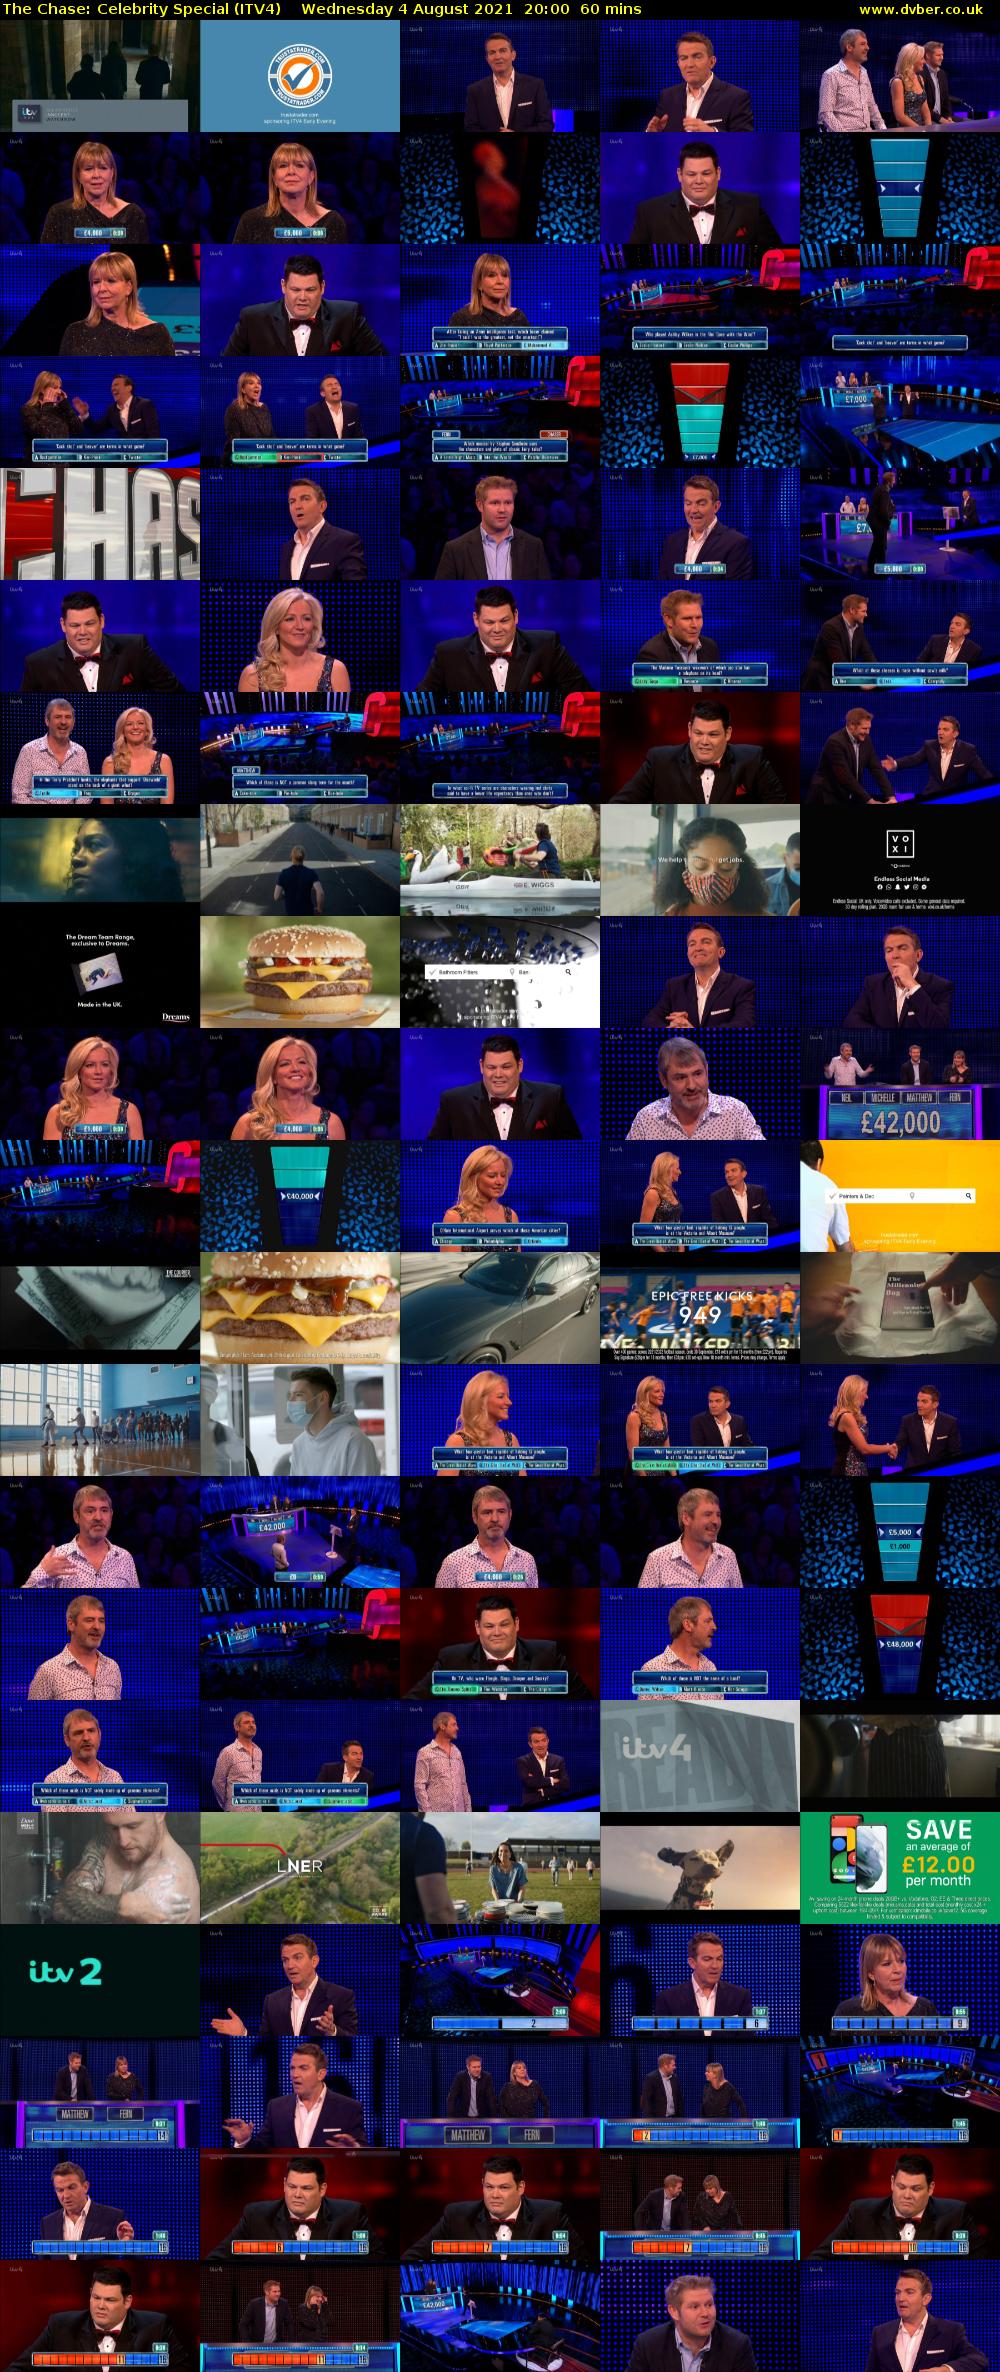 The Chase: Celebrity Special (ITV4) Wednesday 4 August 2021 20:00 - 21:00